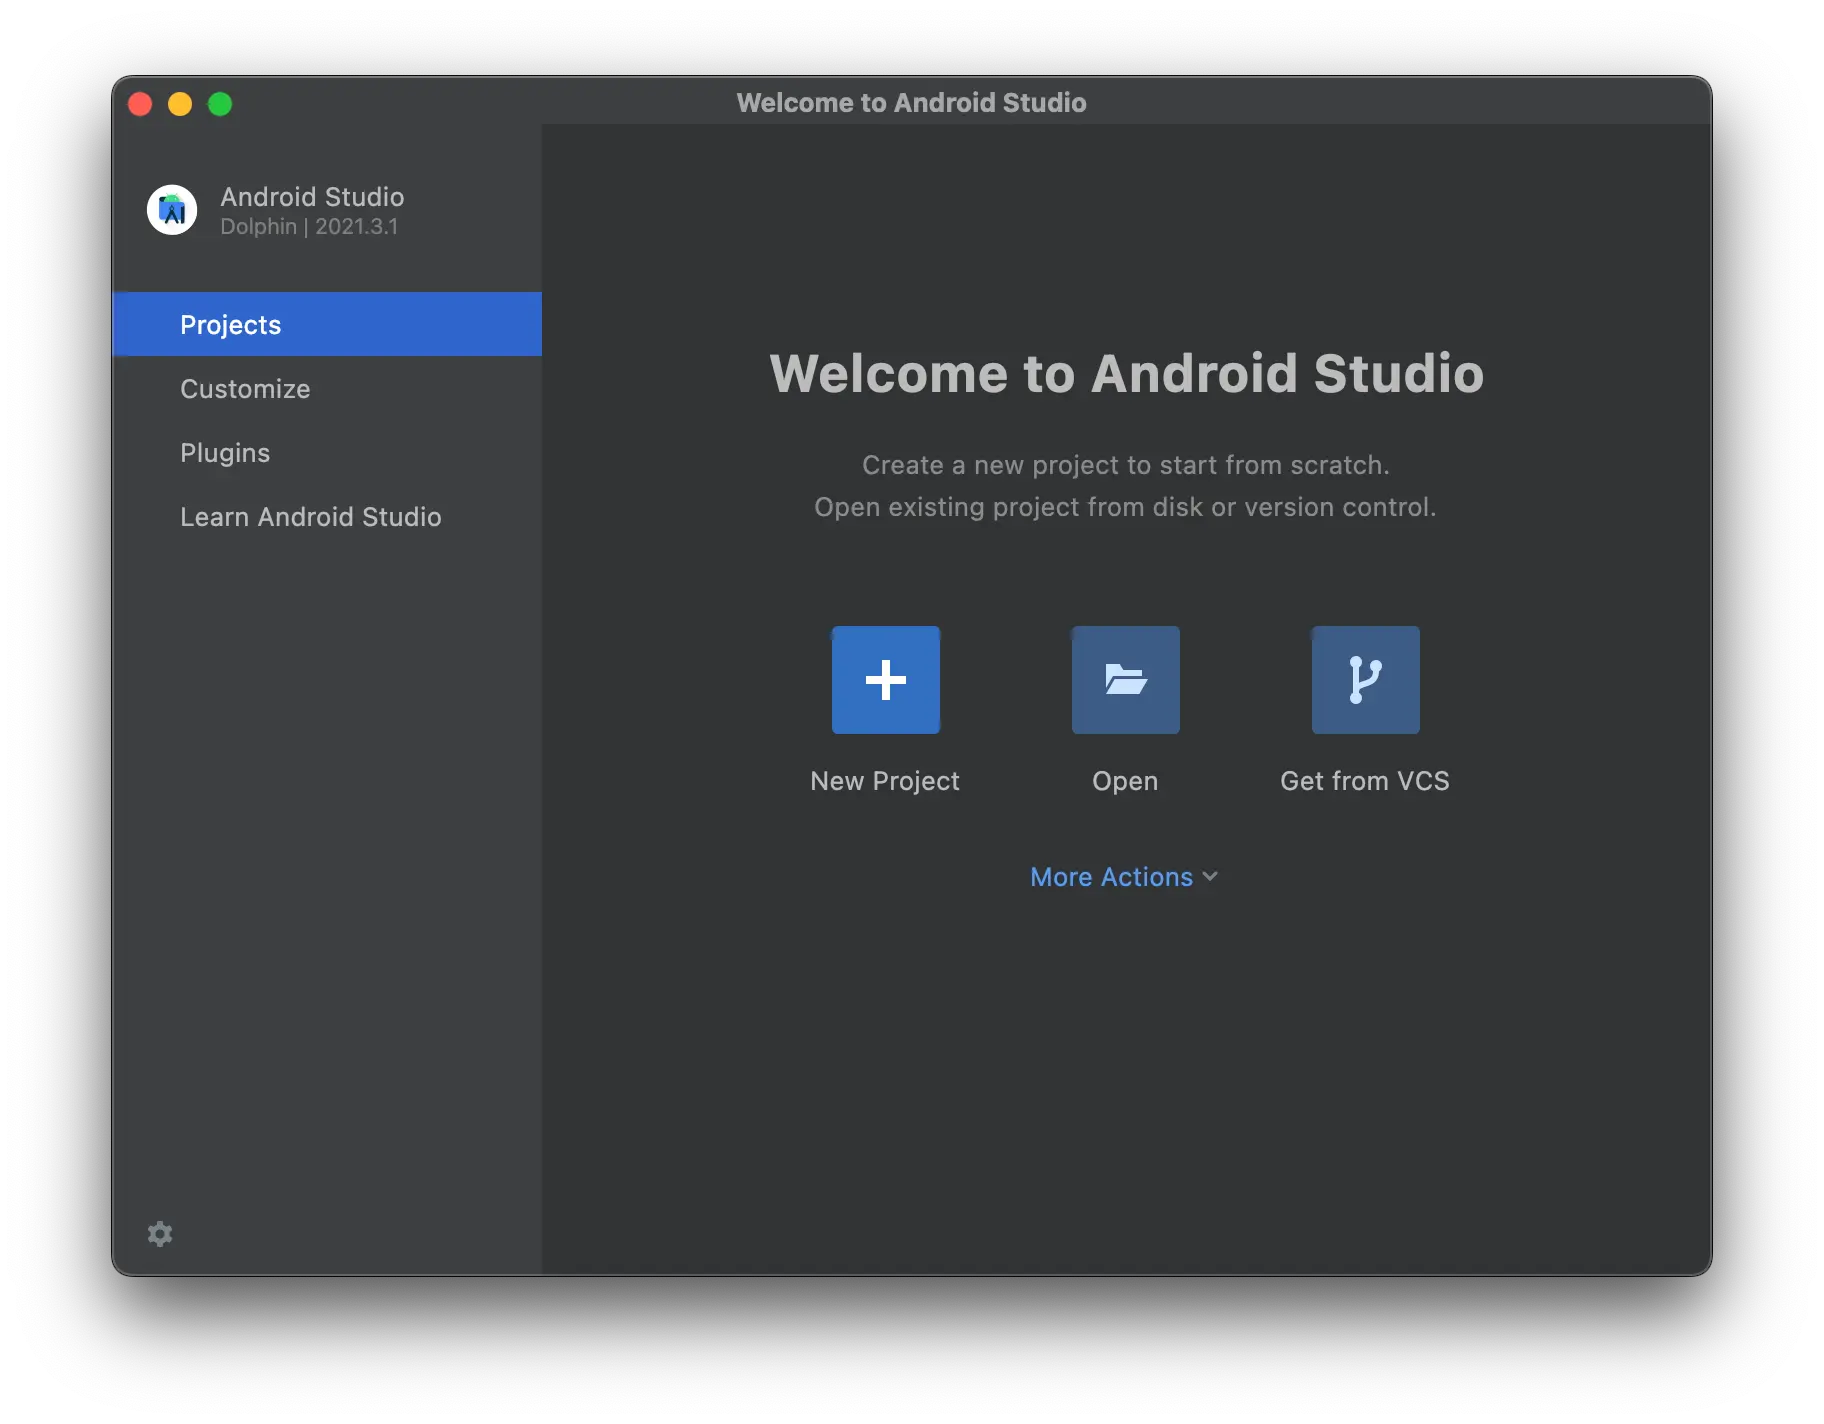 Shows the Android studio welcome window